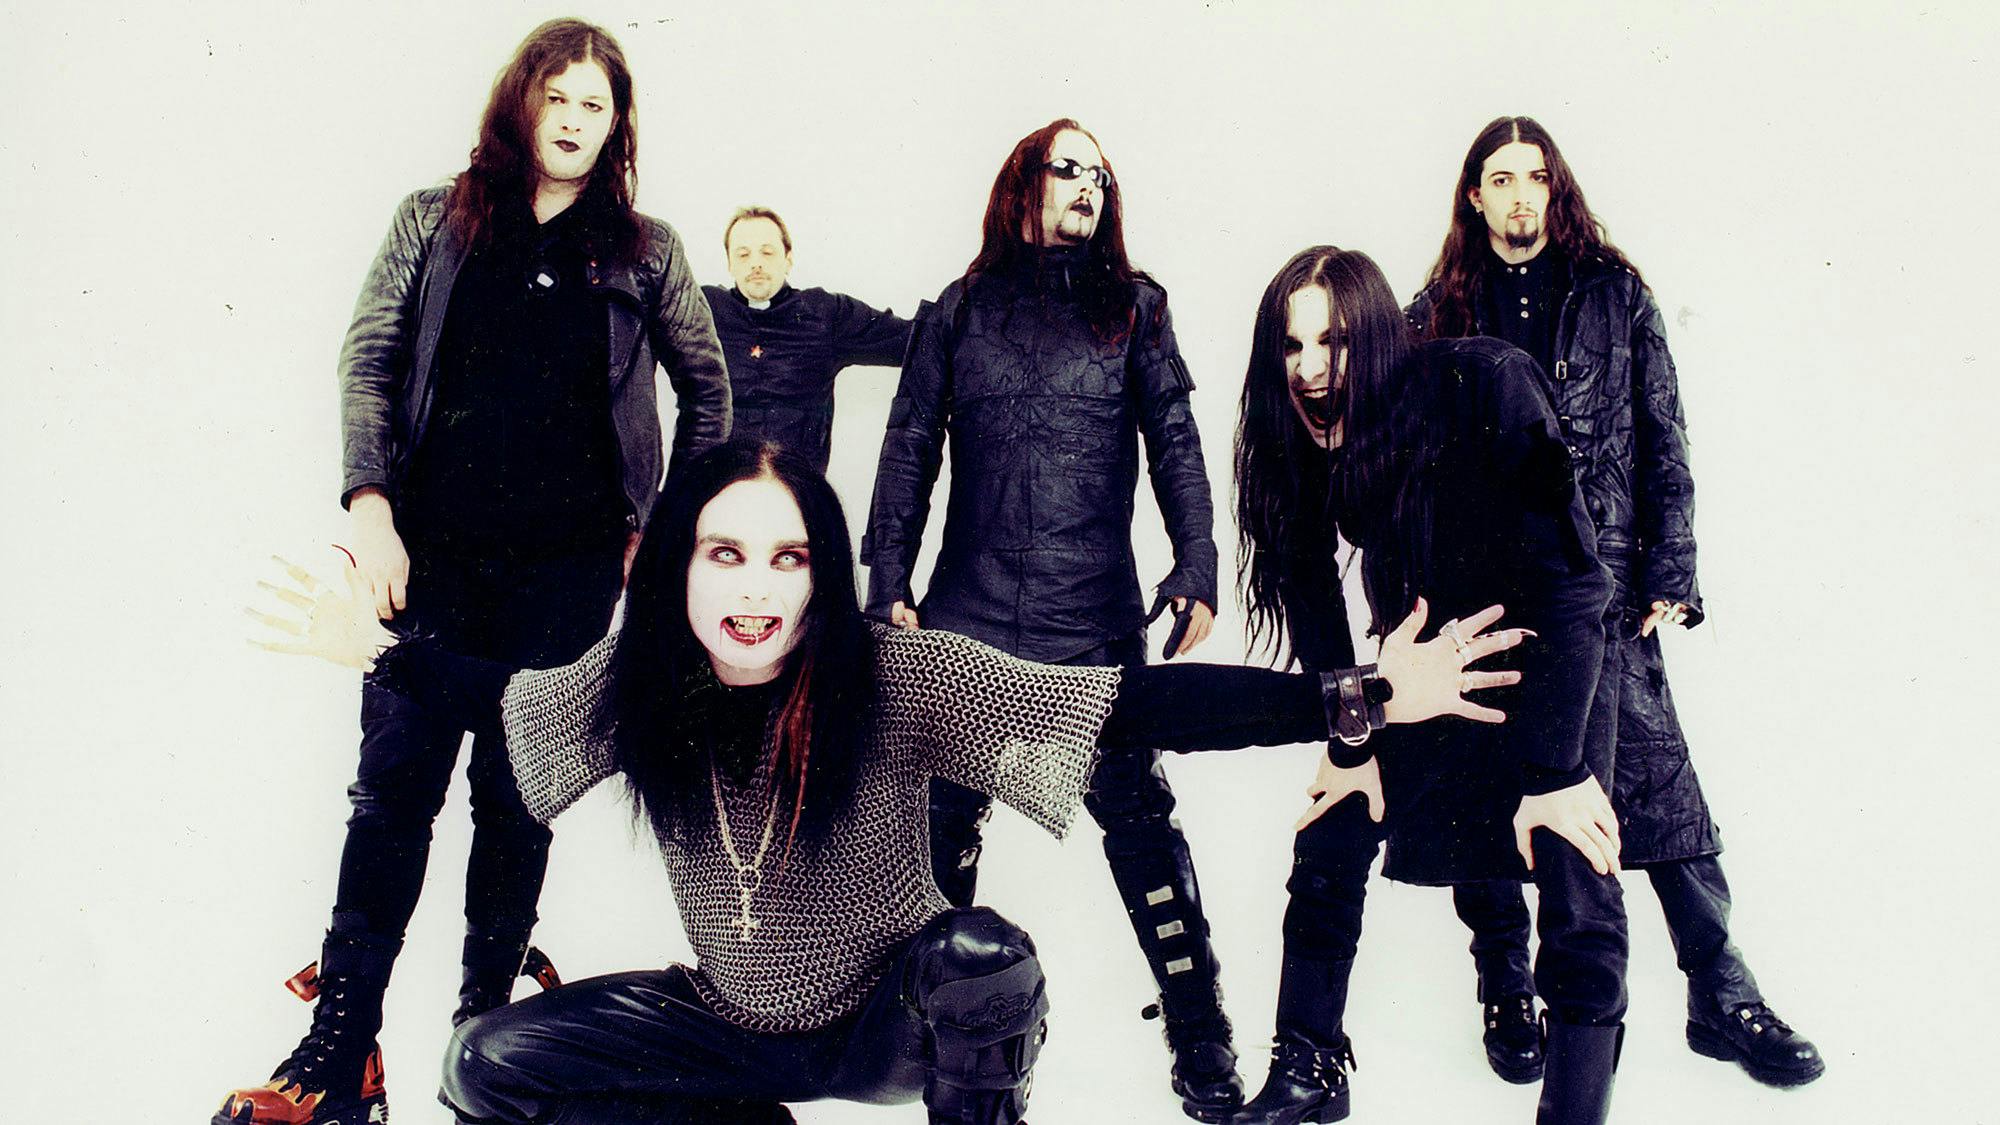 Remembering The Cradle Of Filth "Jesus Is A C**t" T-Shirt Controversy